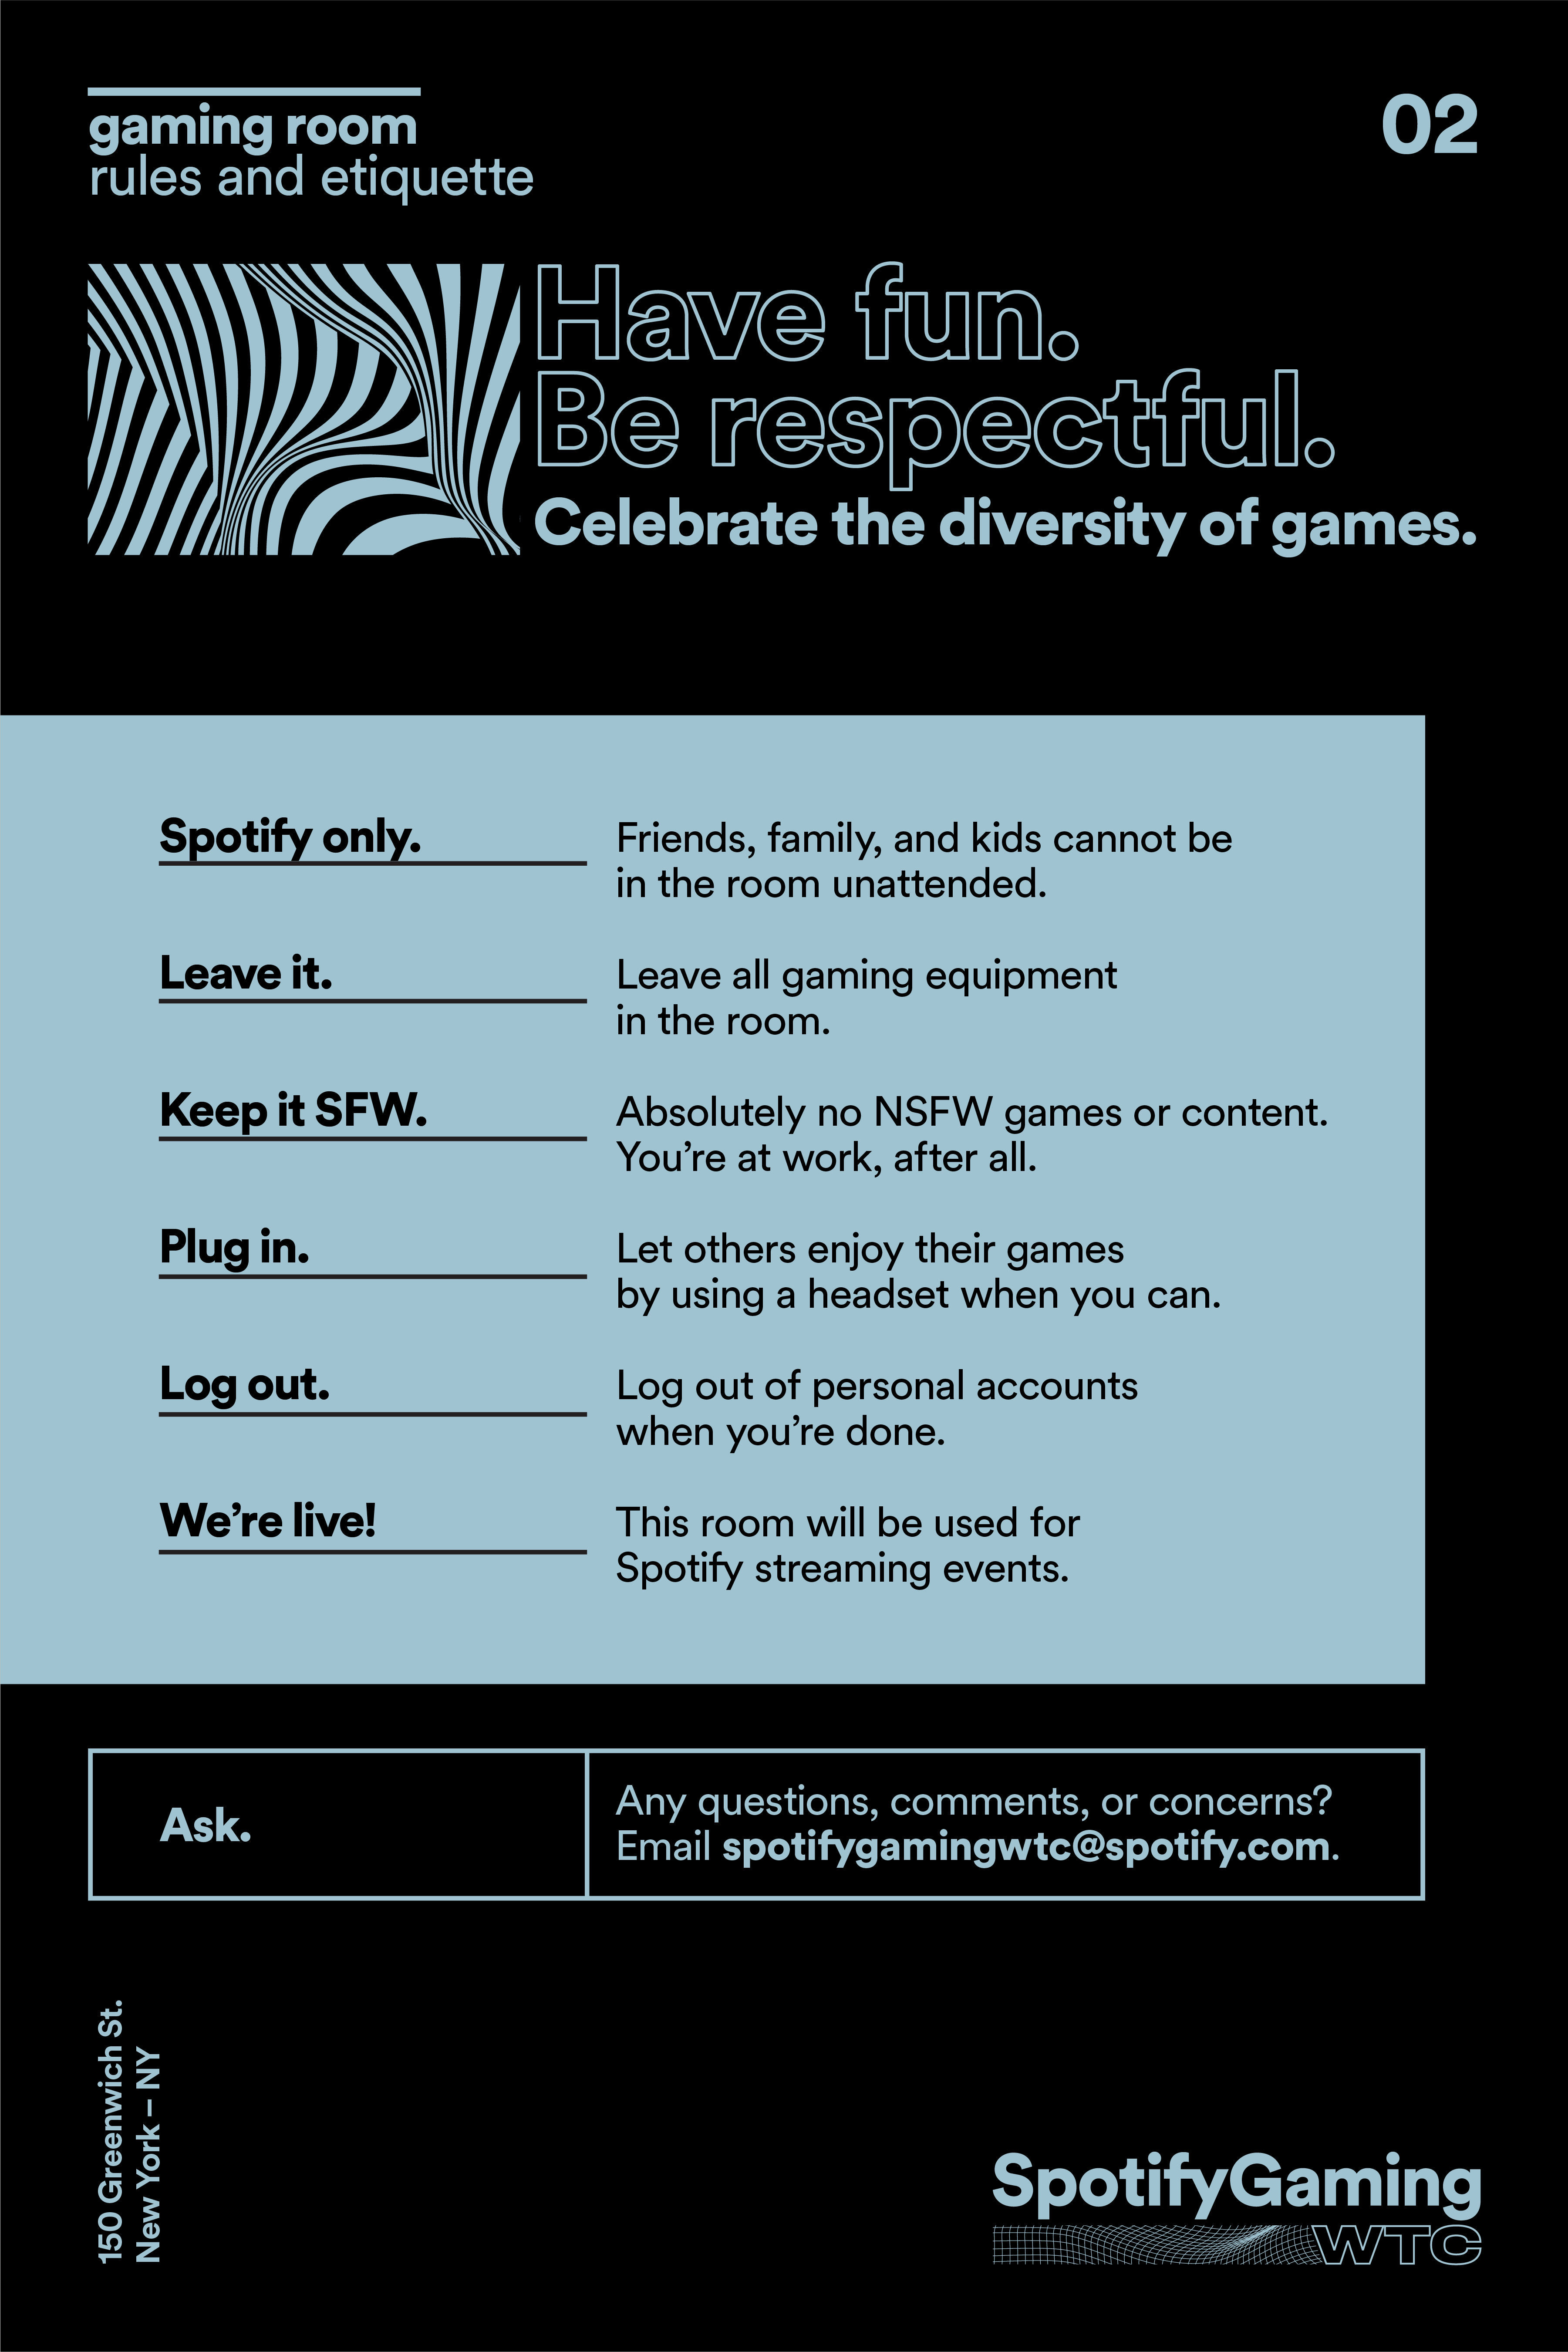 spotify-gaming-room-rules-and-etiquette-02